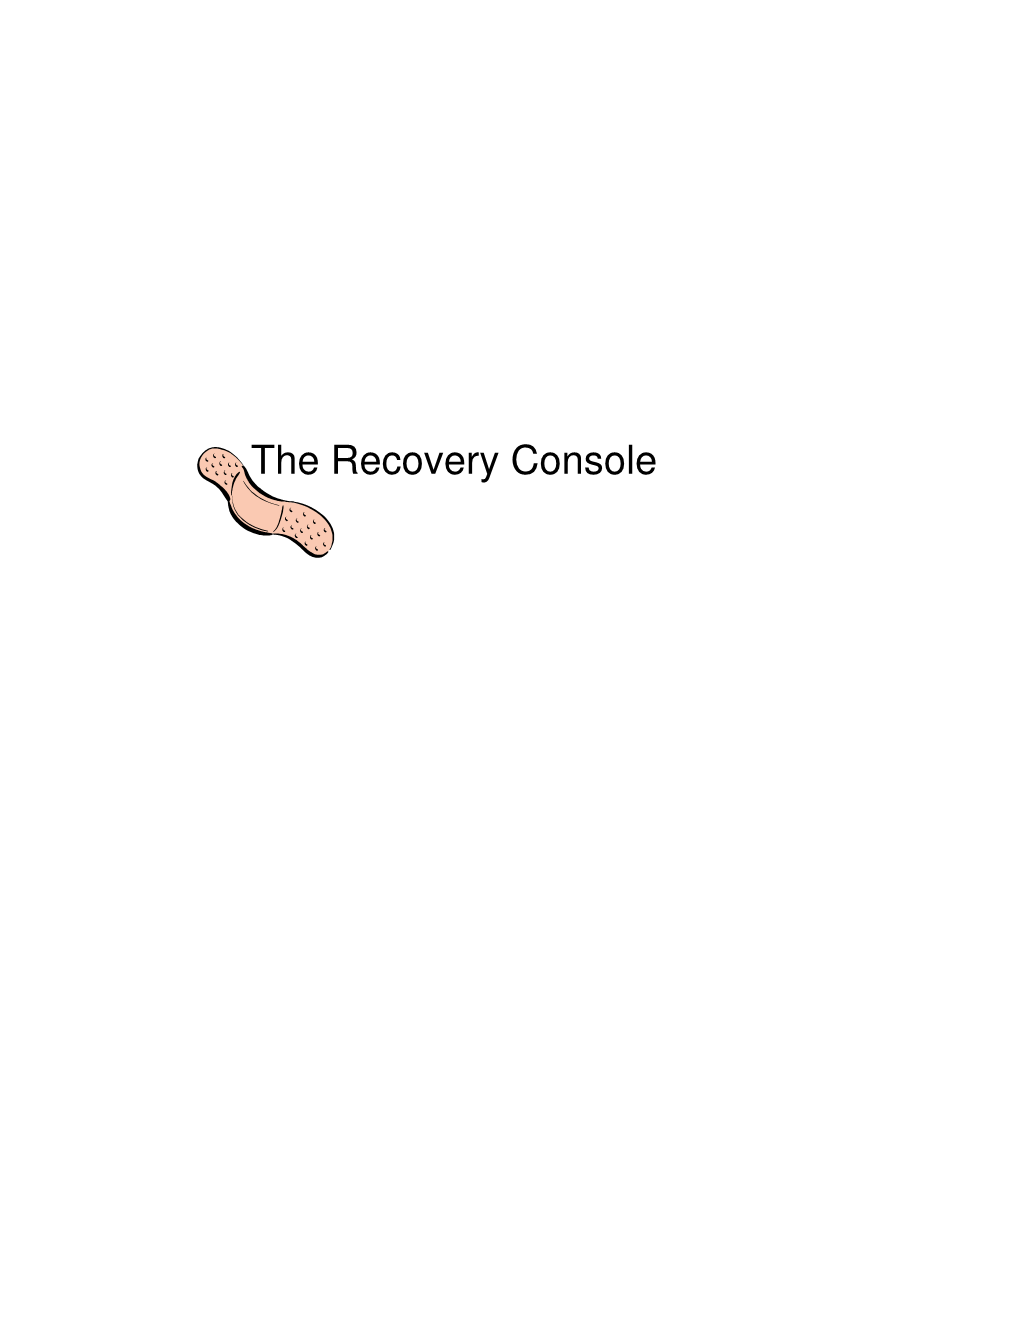 The Recovery Console Content